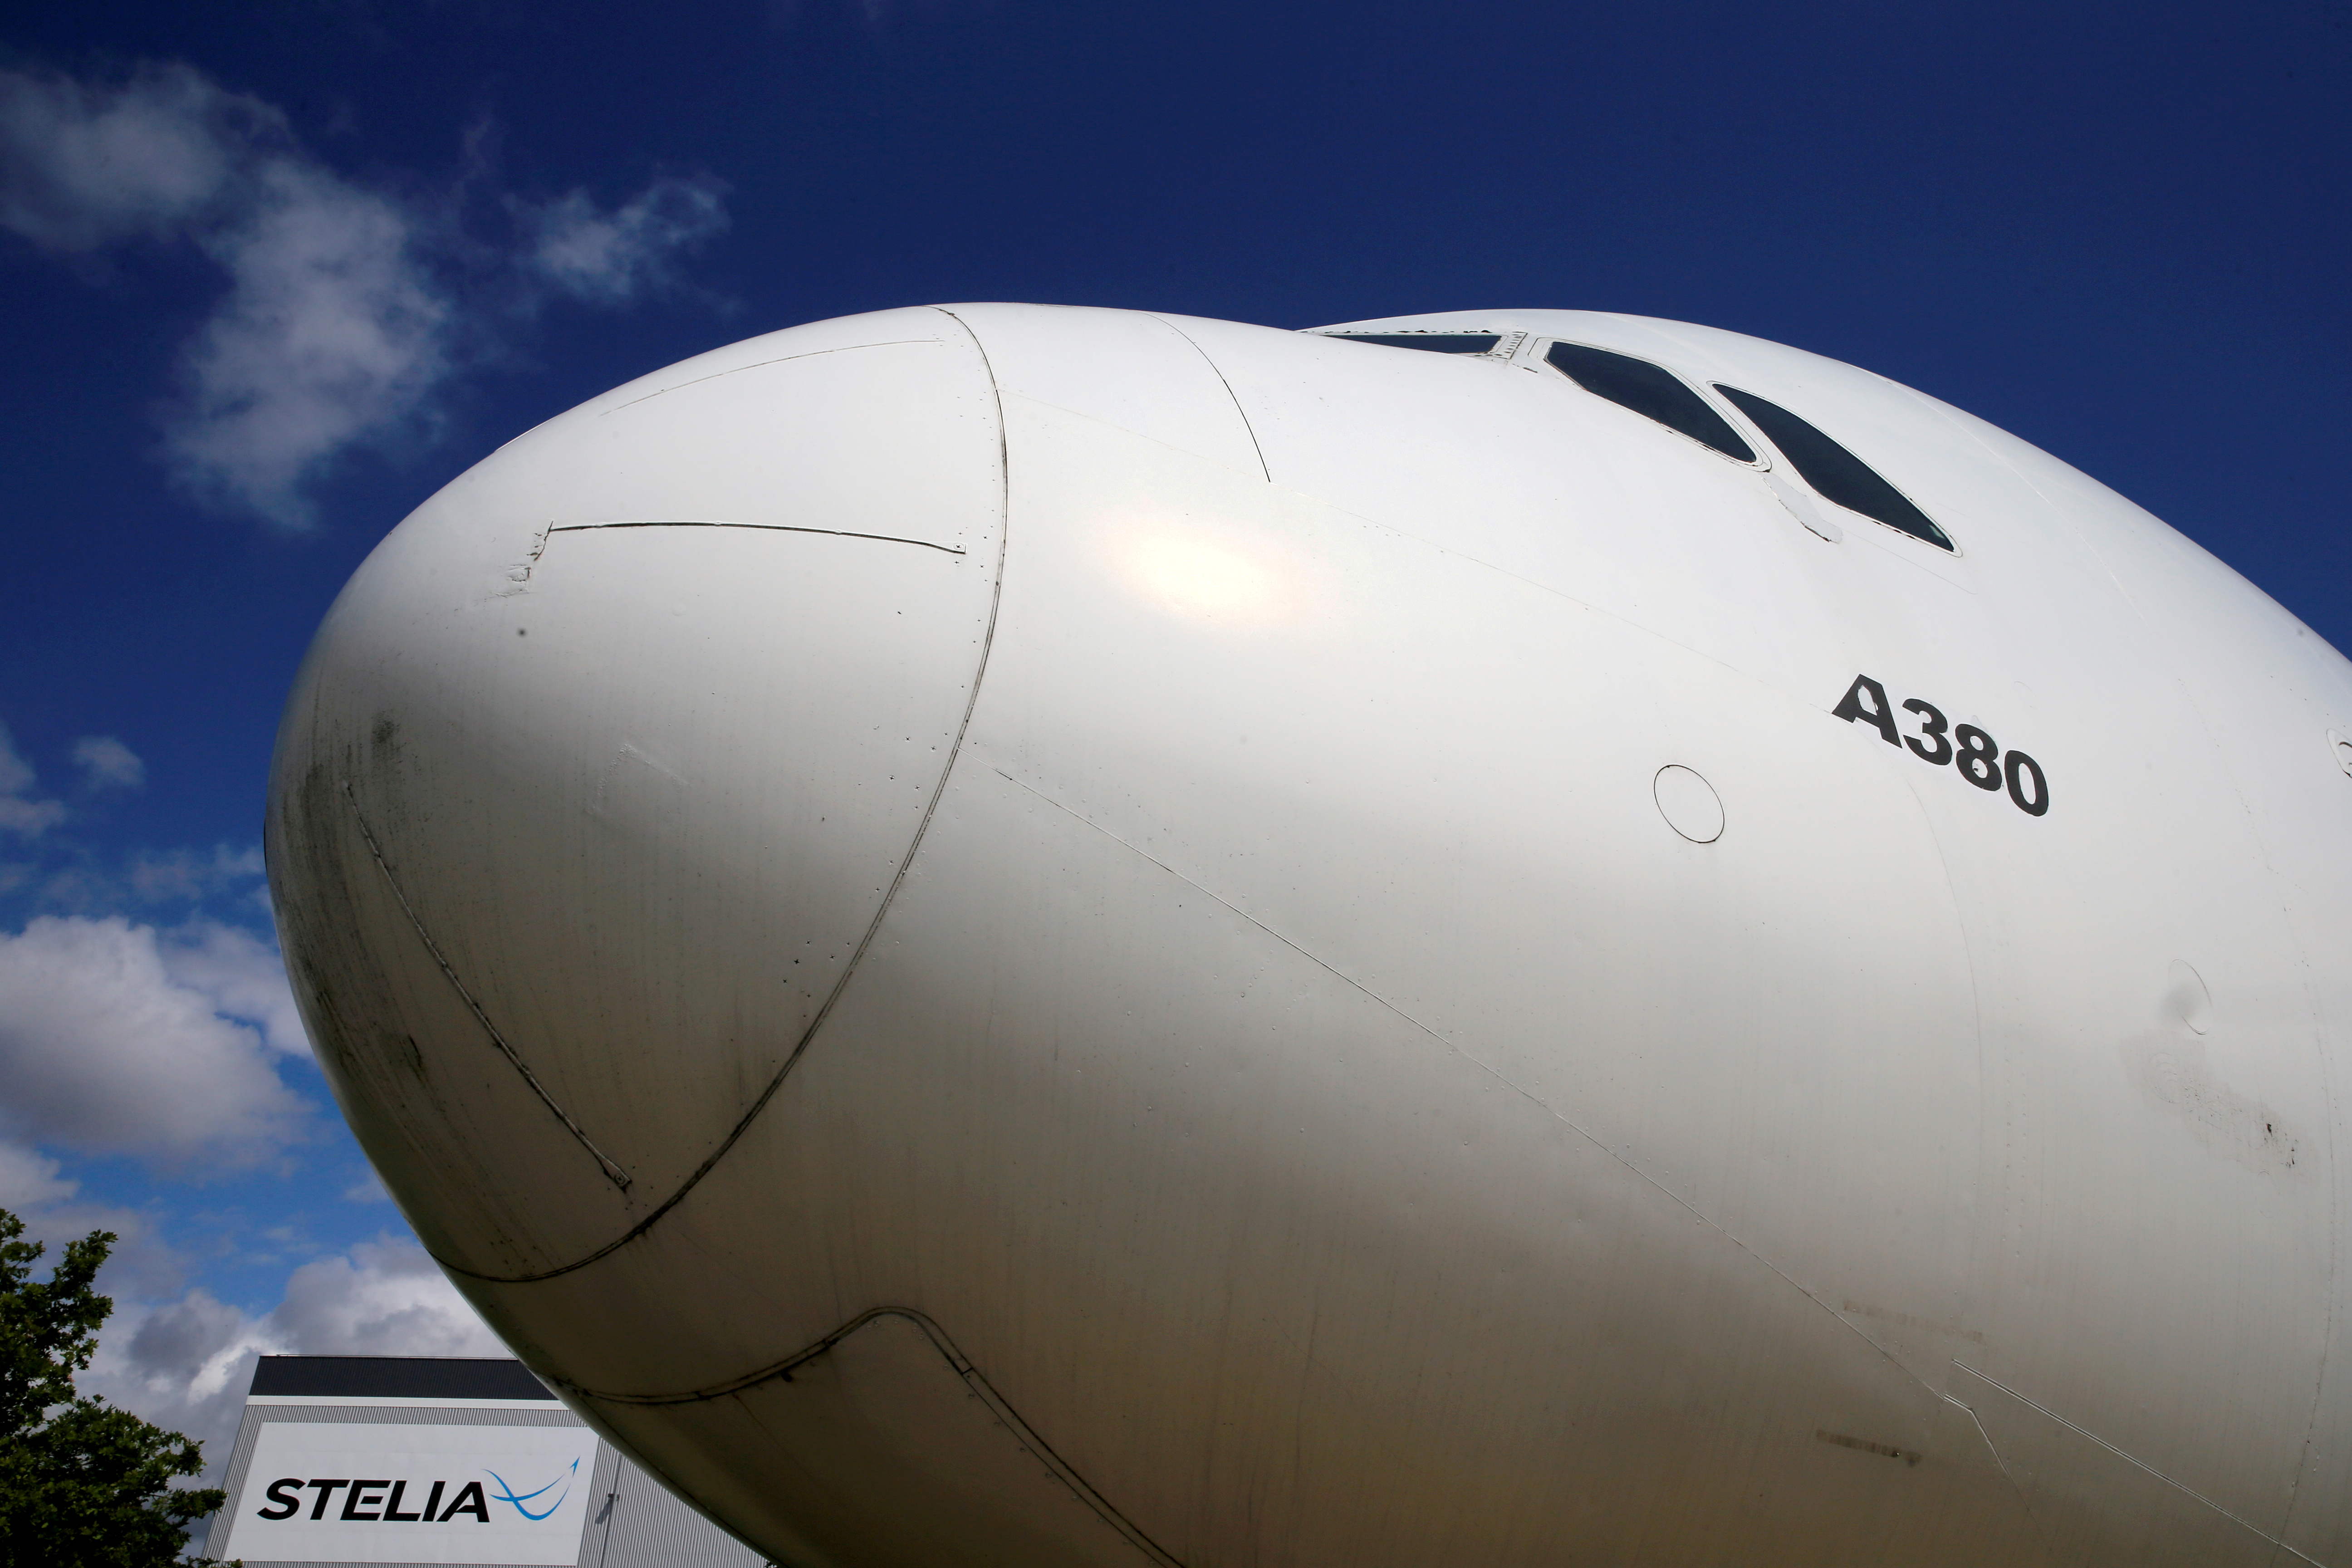 The nose of an Airbus A380 is seen outside the factory of Stelia Aerospace, a subsidiary of Airbus, in Meaulte, France, July 2, 2020. REUTERS/Pascal Rossignol/File Photo